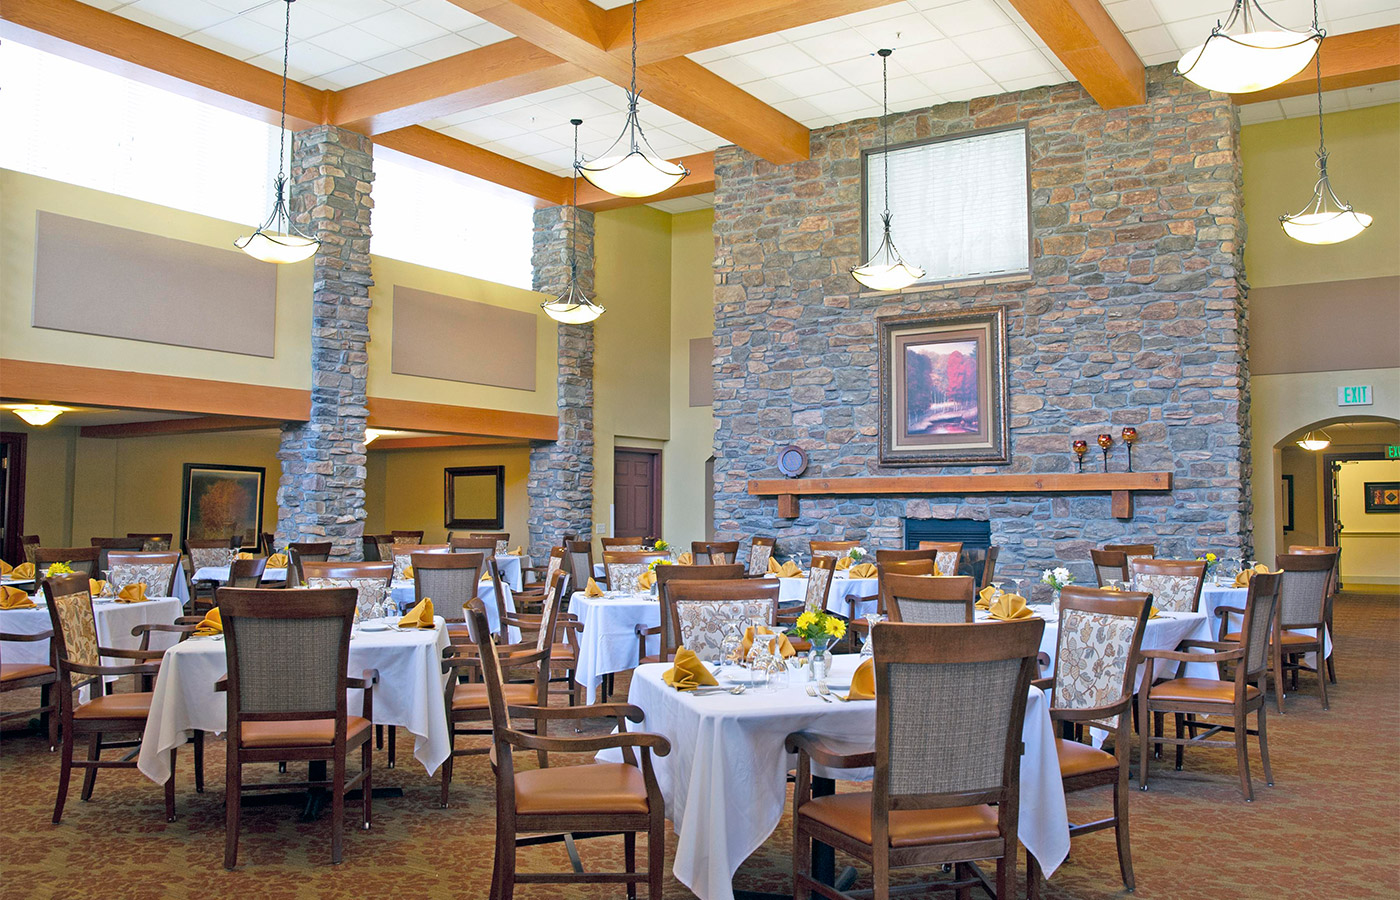 The dining area at St. Andrews Village.